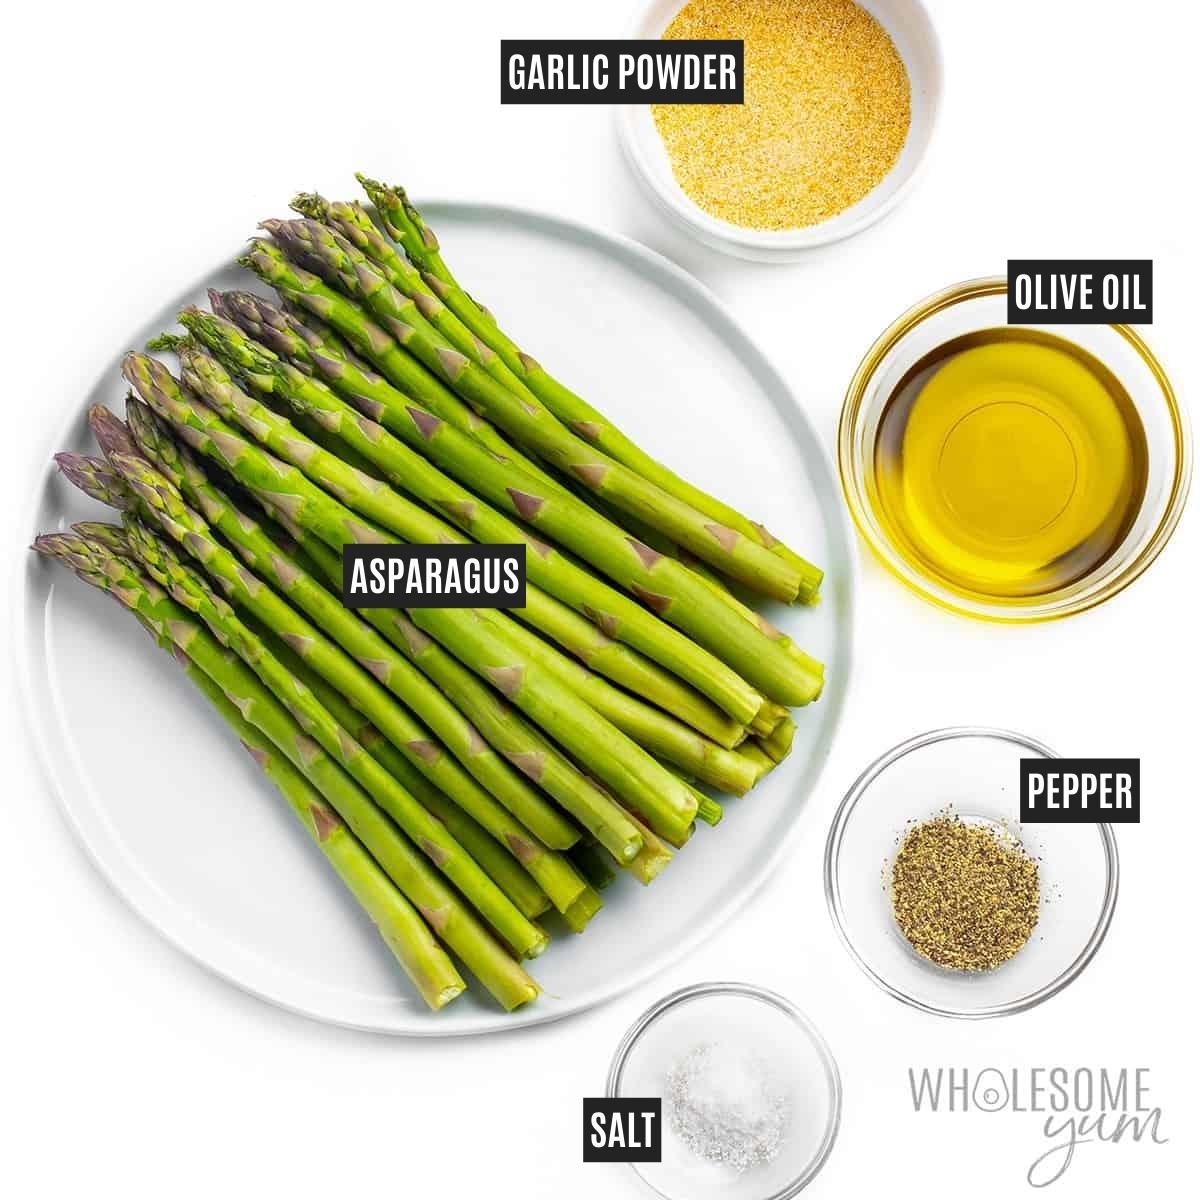 Bunch of asparagus on a plate with olive oil and seasonings next to it.